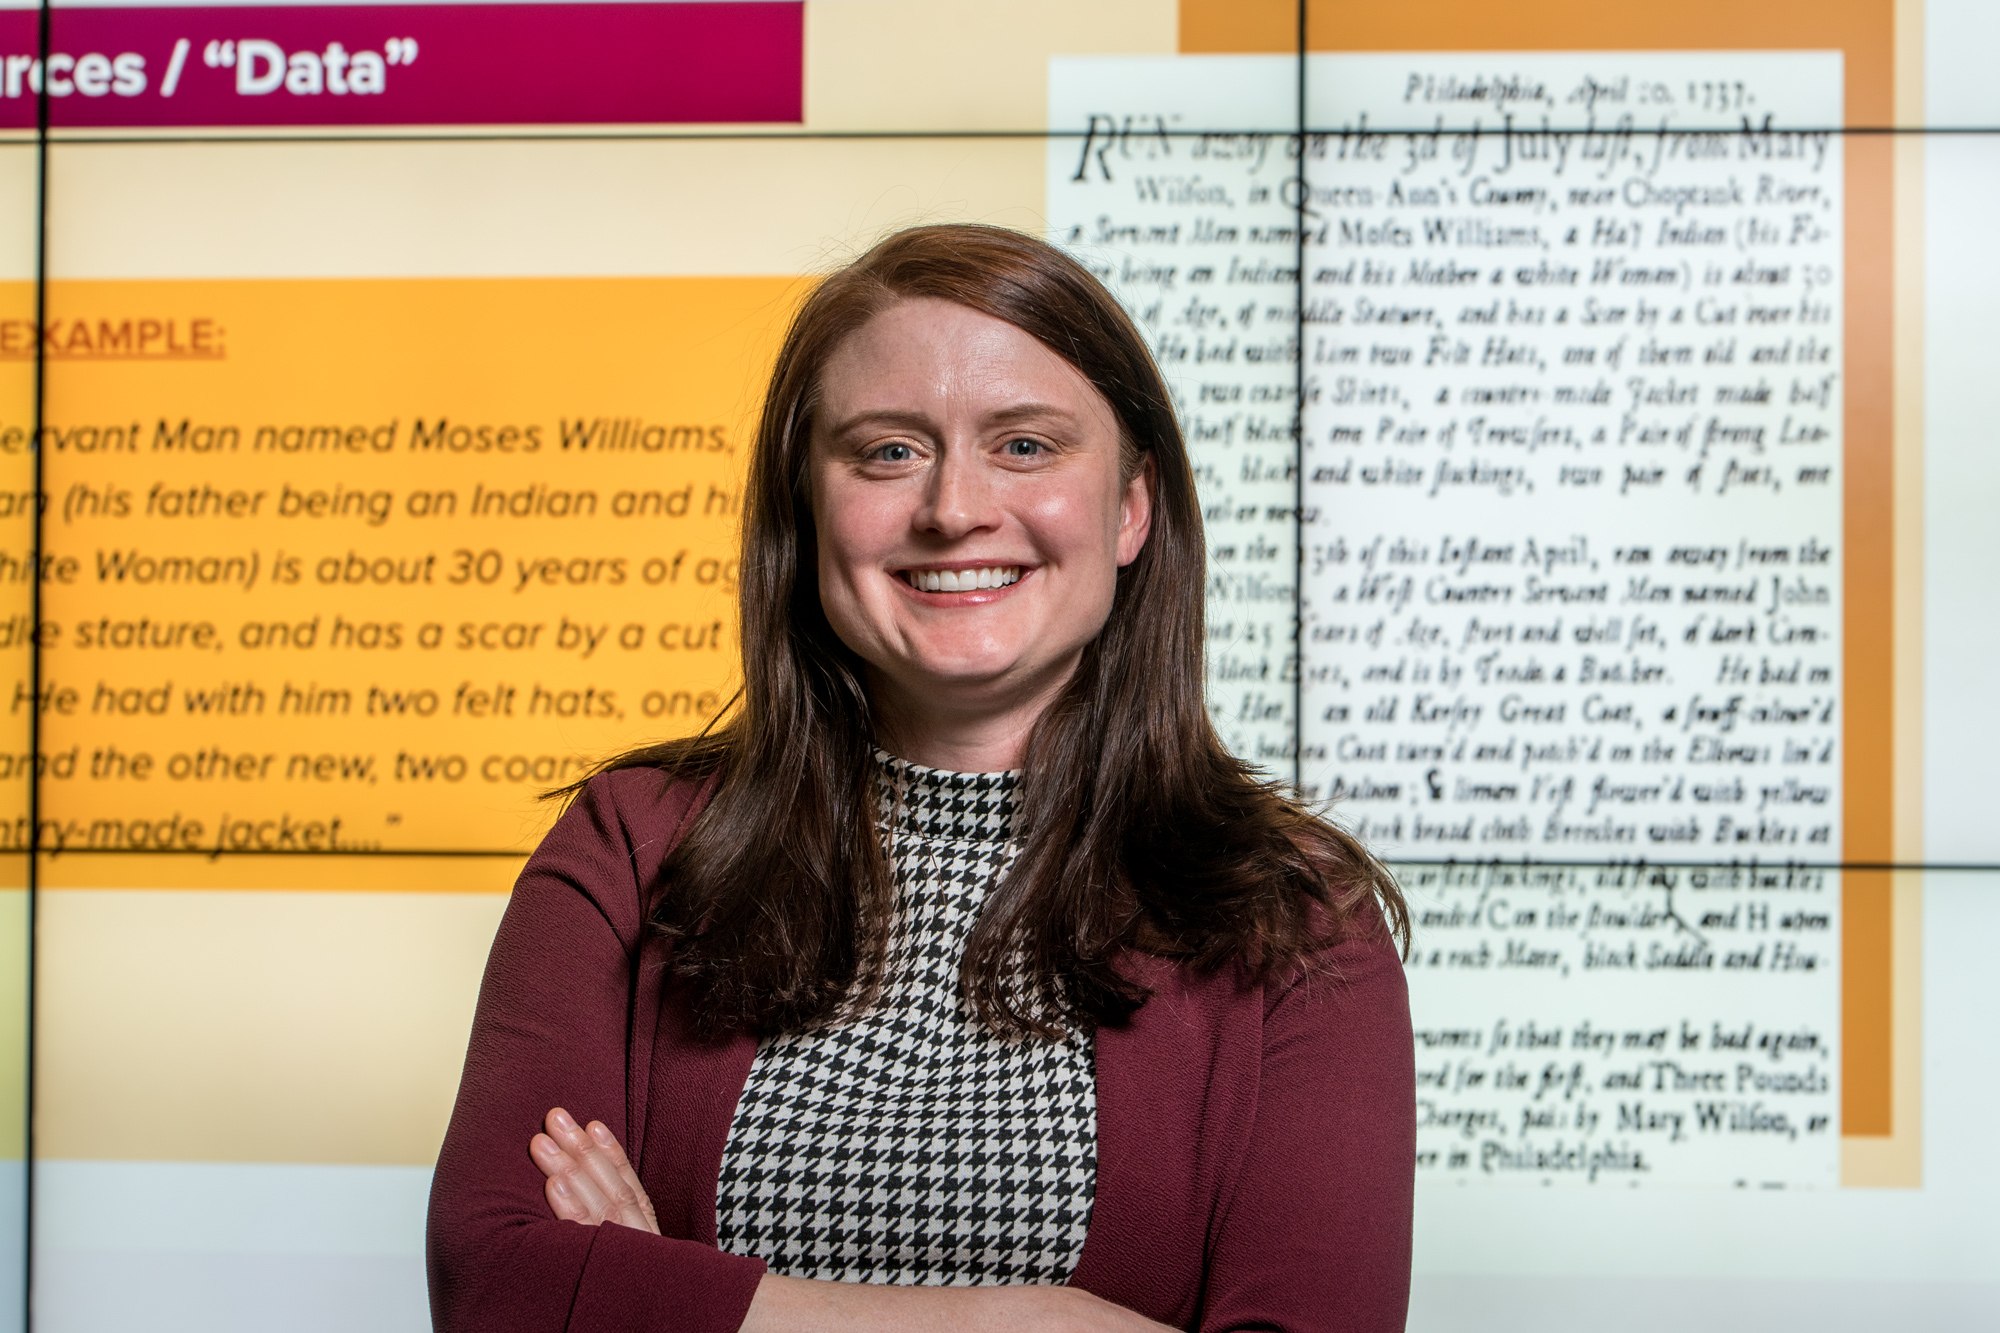 Ashley Champagne, director of Brown’s Center for Digital Scholarship, and Linford Fisher created the Stolen Relations website, a repository of more than 5,500 records of Indigenous slavery found in historical documents.